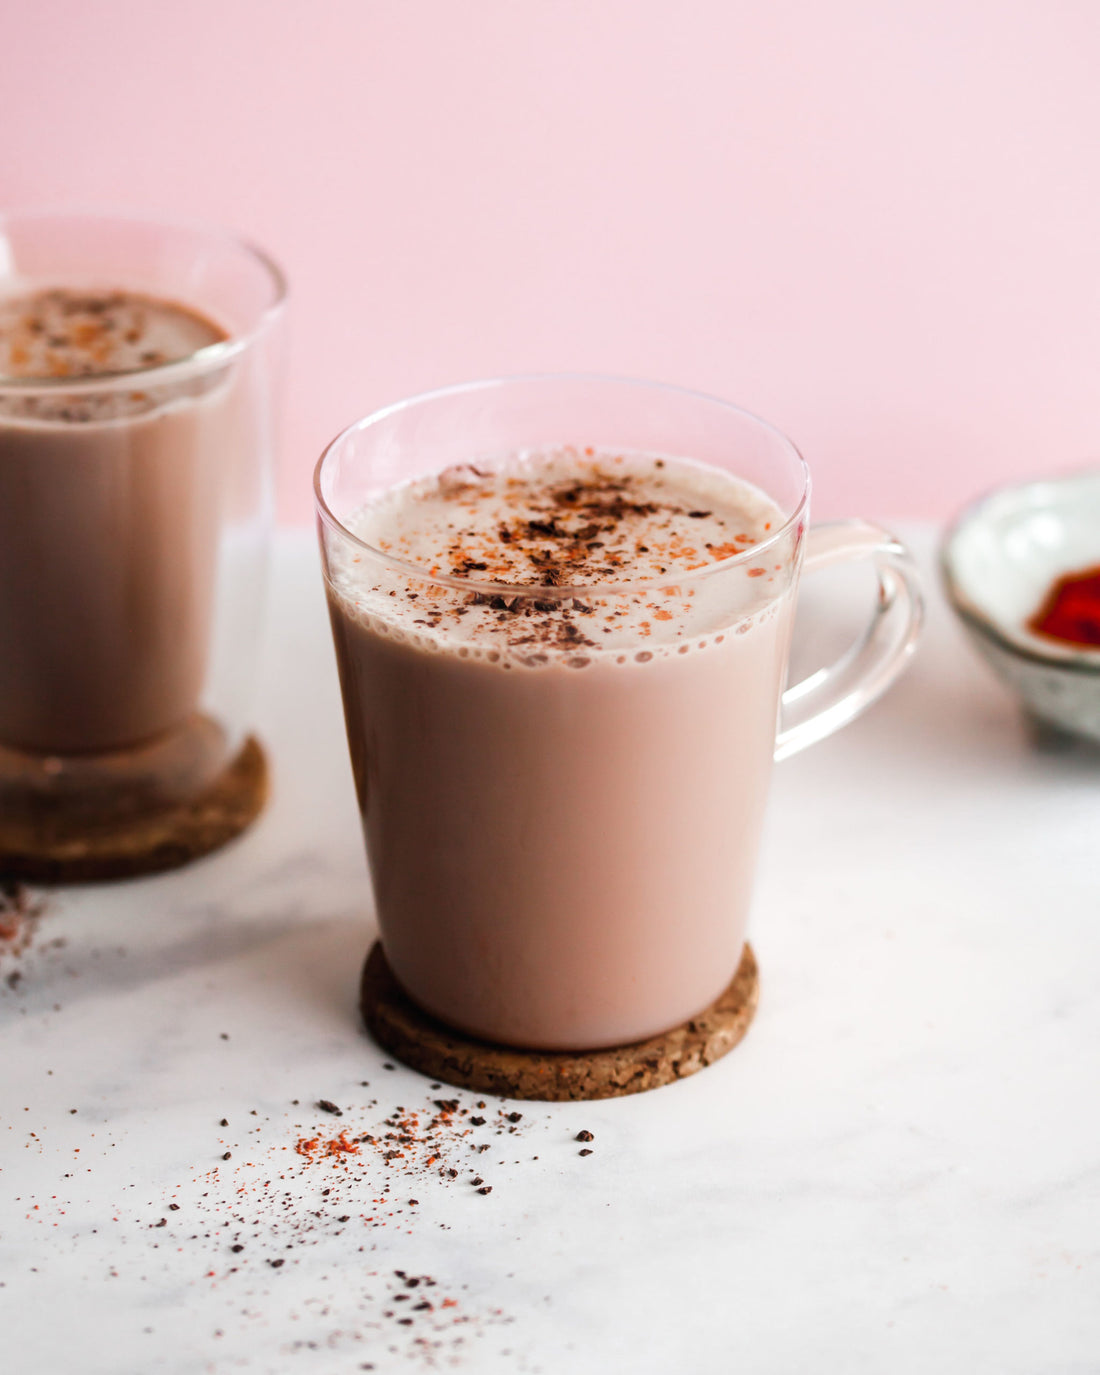 Spicy hot chocolate